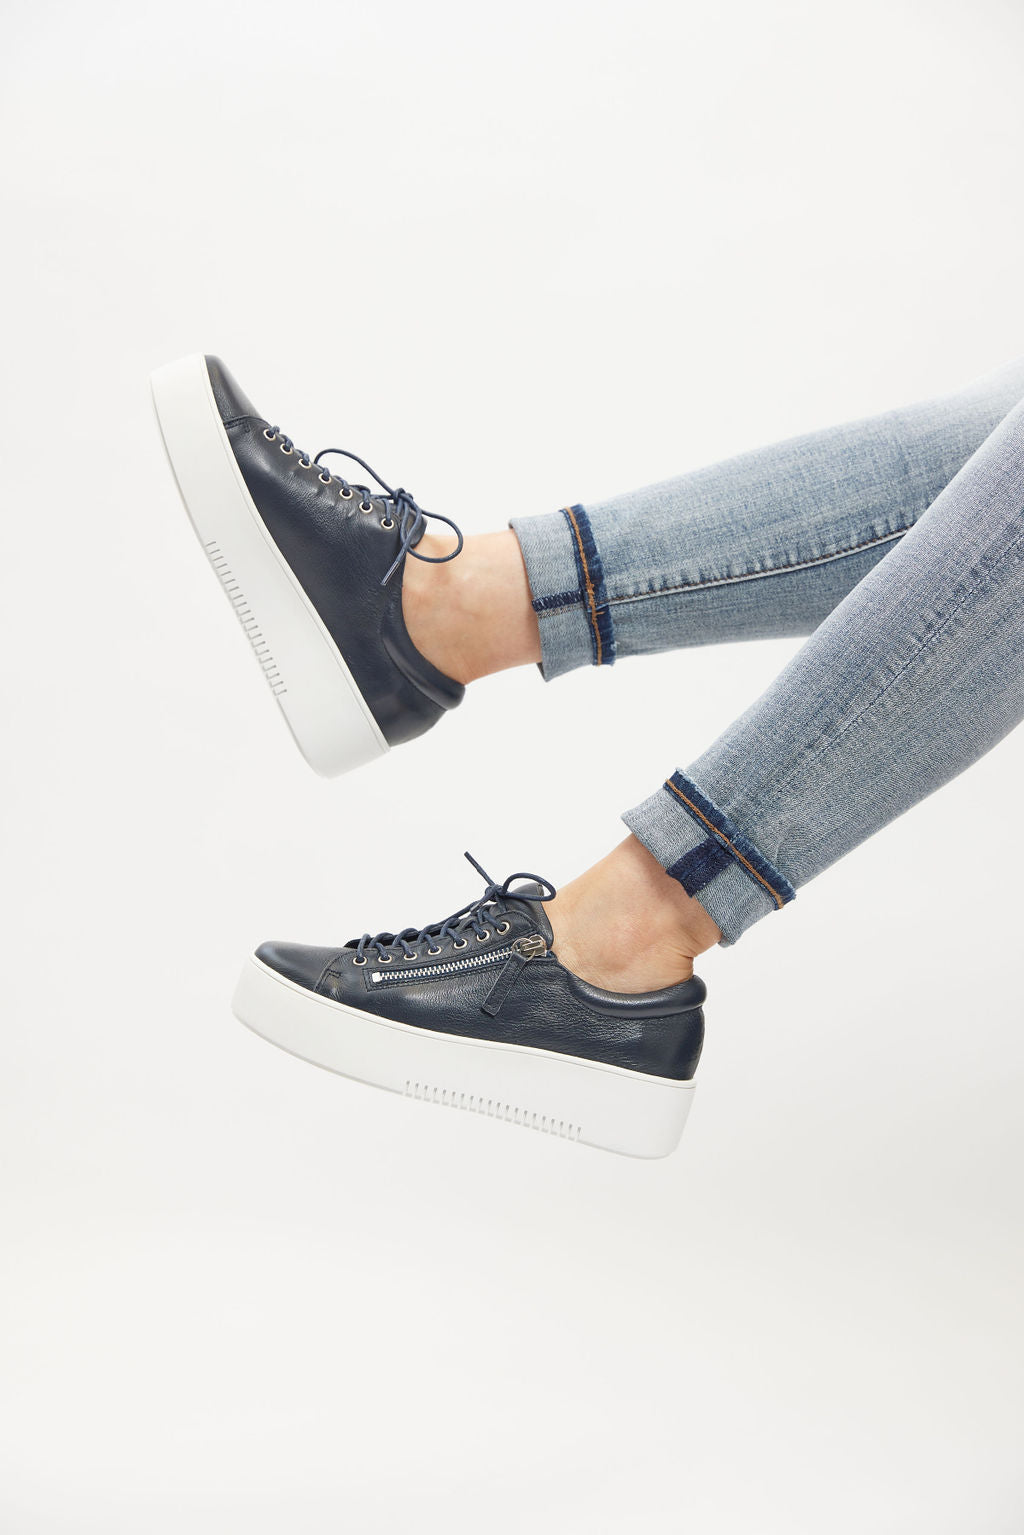 WOLFIE SNEAKERS - NAVY LEATHER